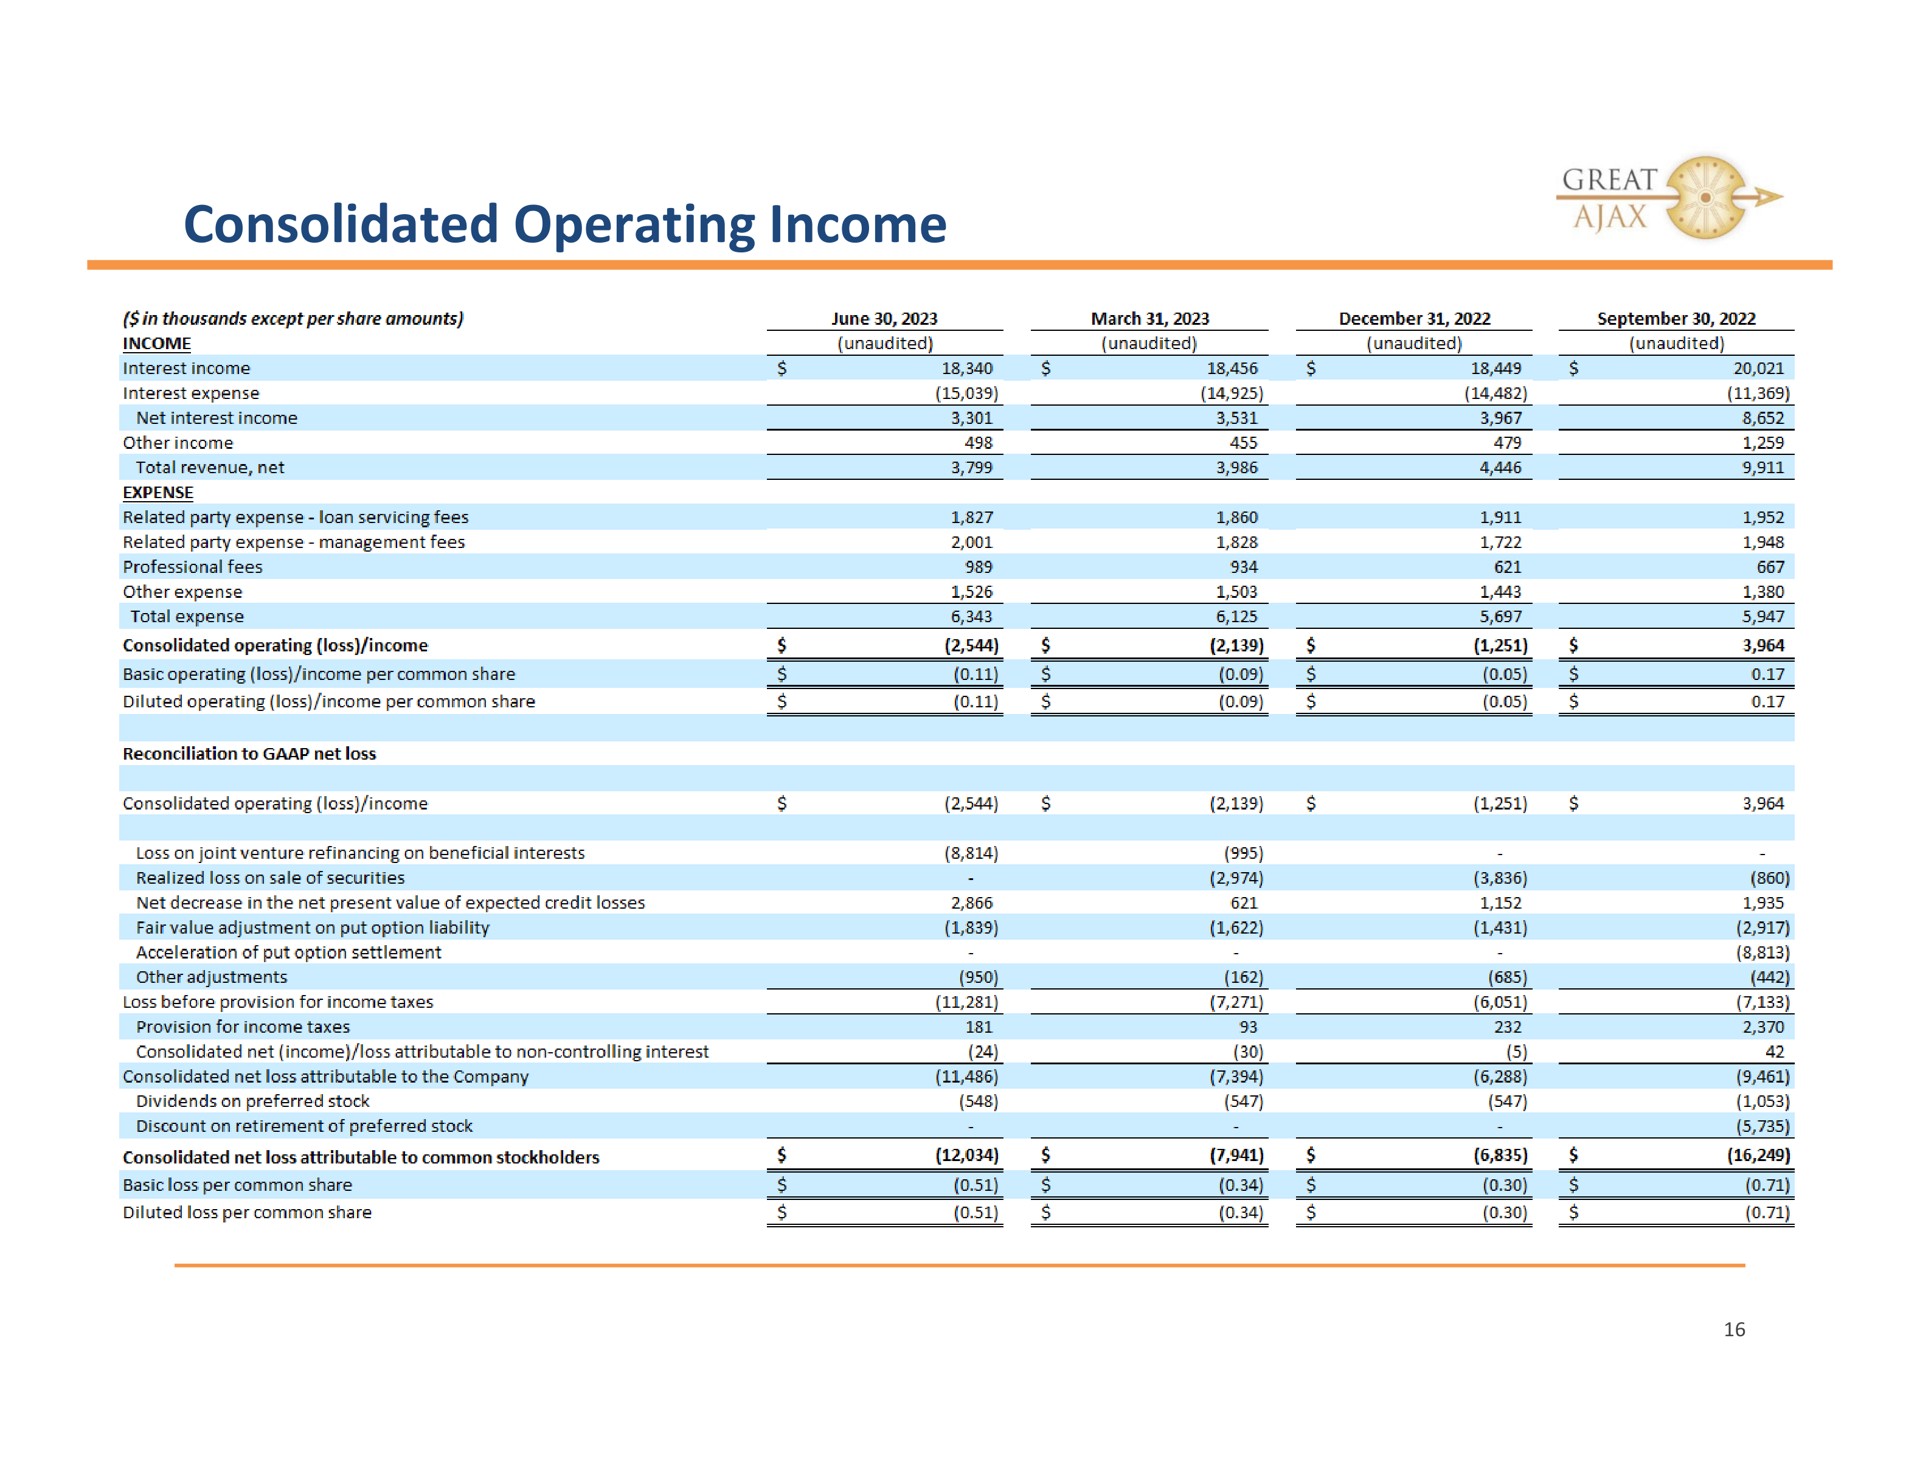 consolidated operating income great | Great Ajax